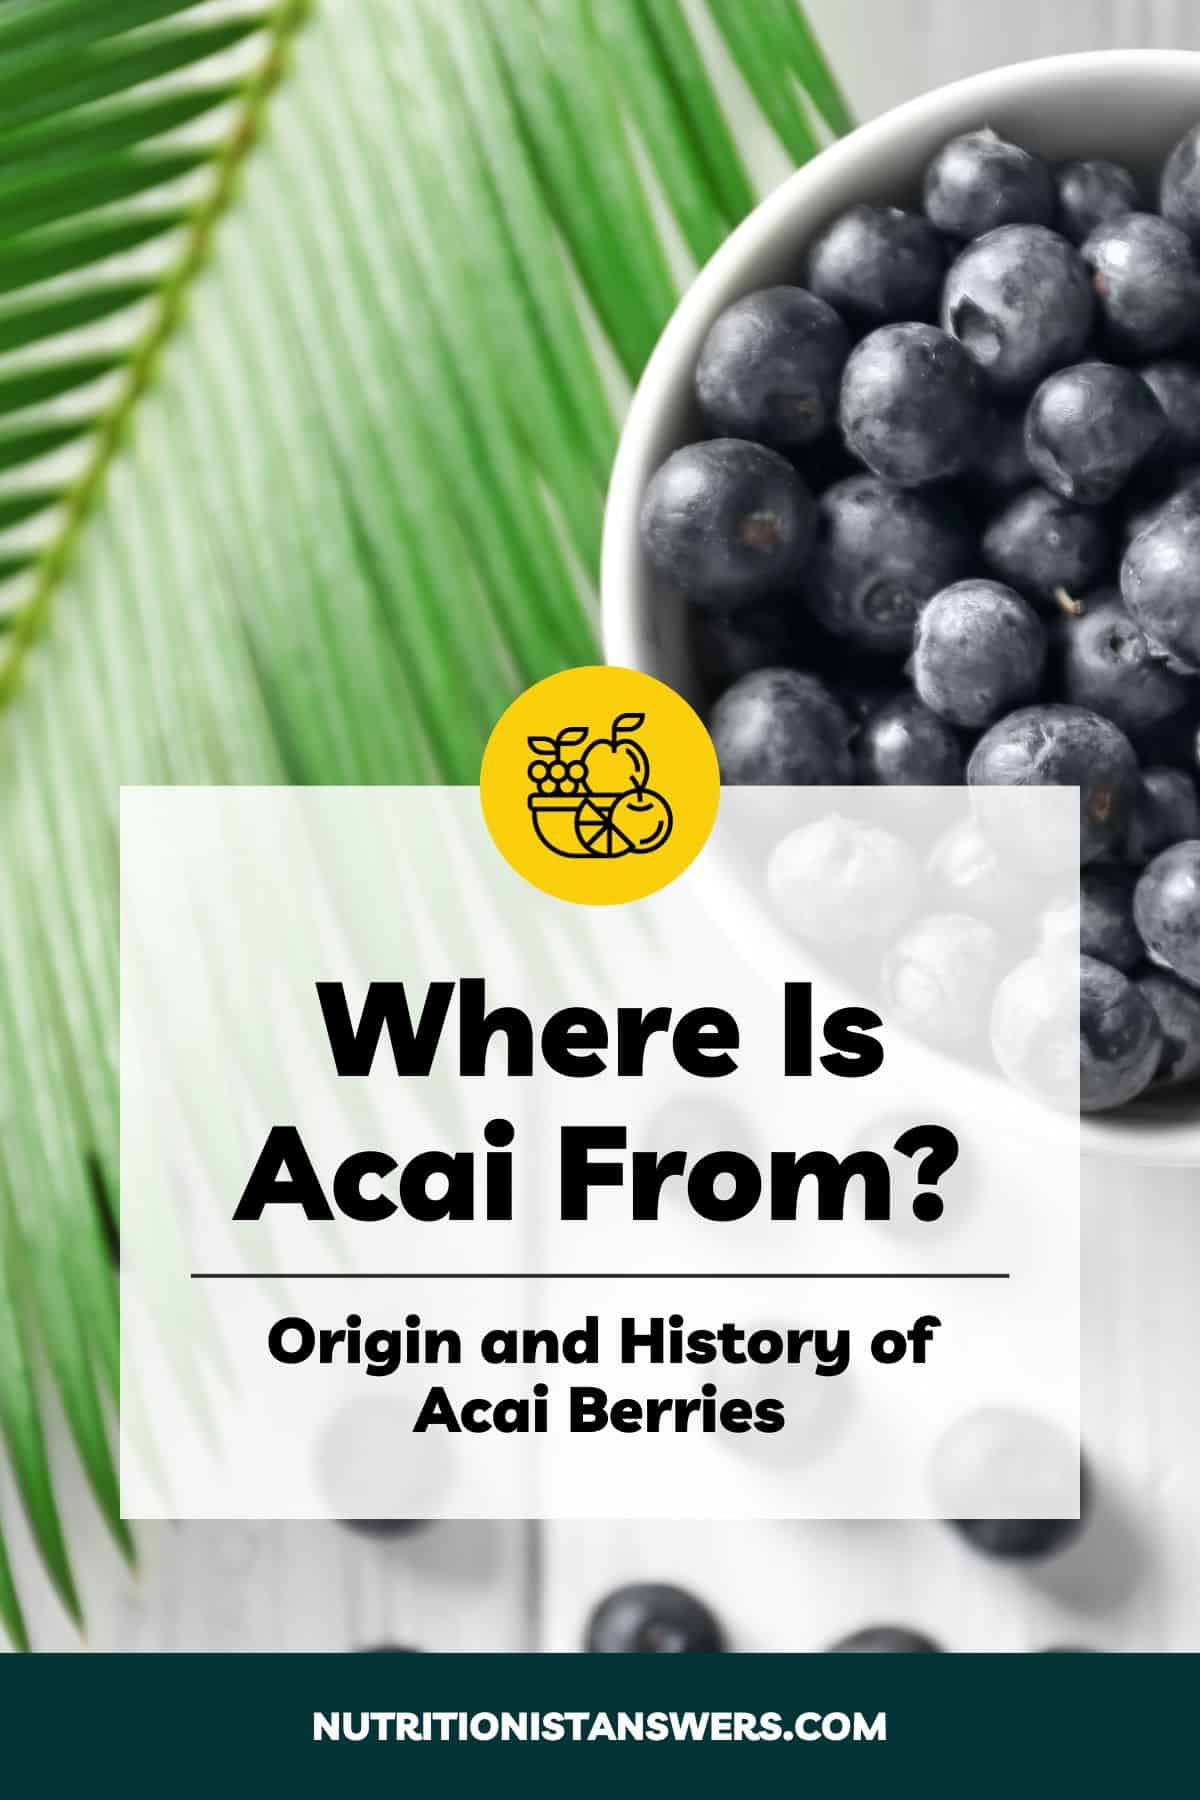 Where Is Acai From? Origin and History of Acai Berries